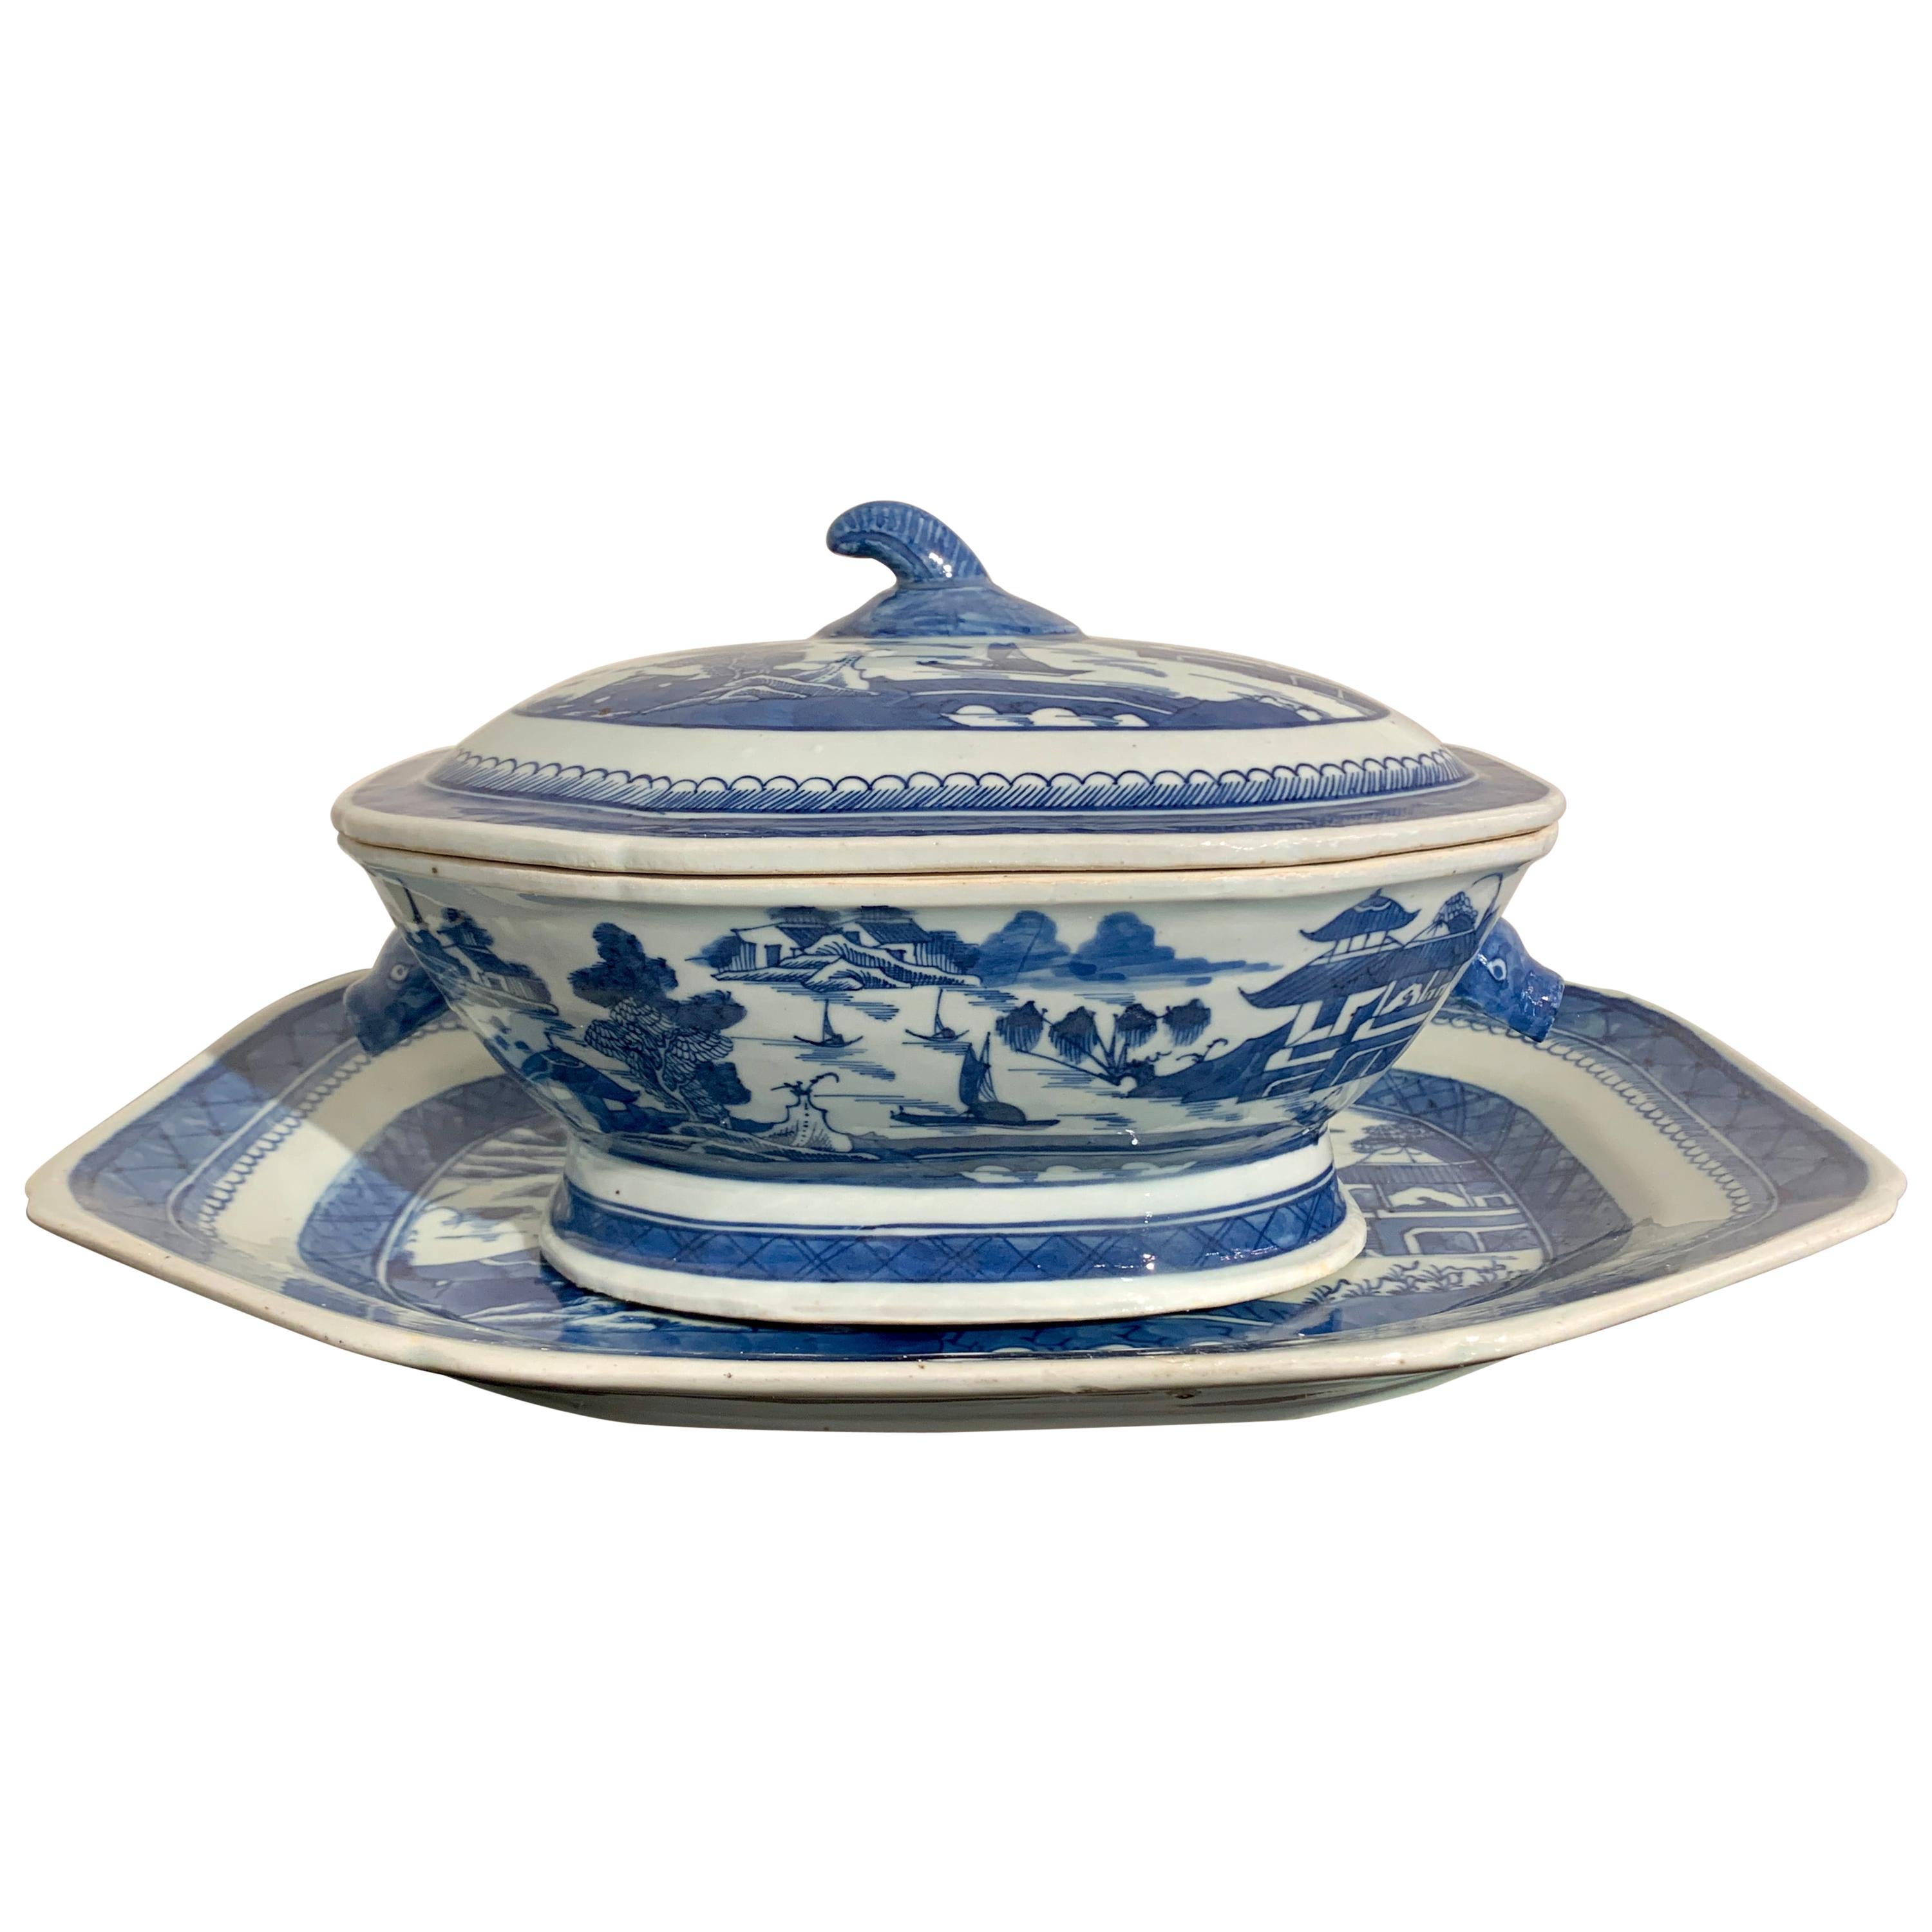 Chinese Export Blue and White Porcelain Covered Tureen and Platter, 19th Cenutry For Sale